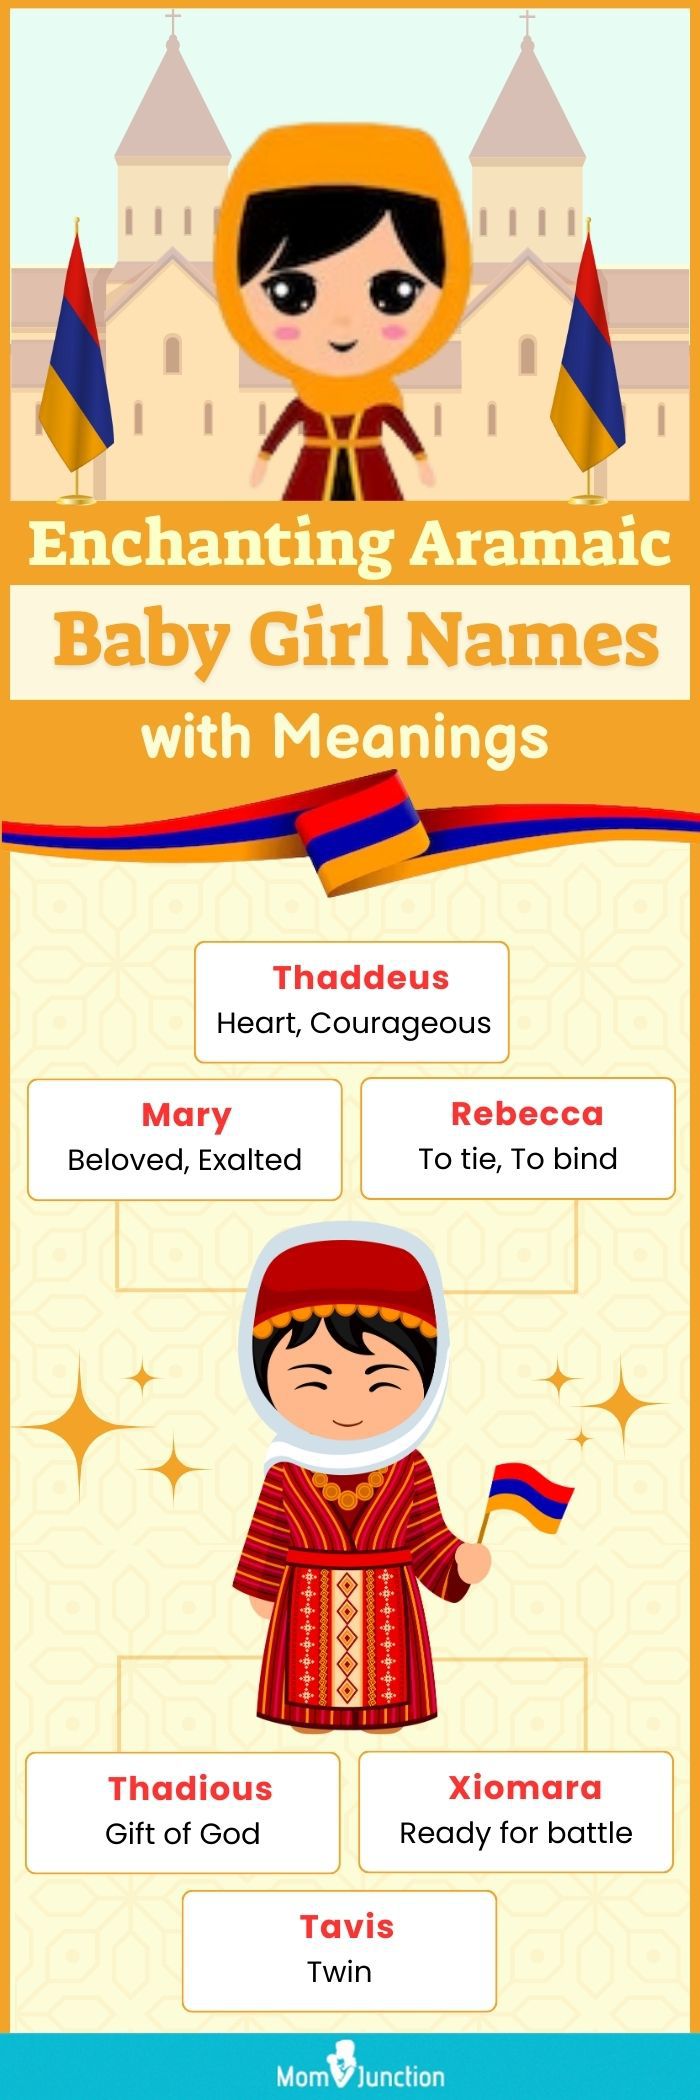 enchanting aramaic babygirl names with meanings (infographic)